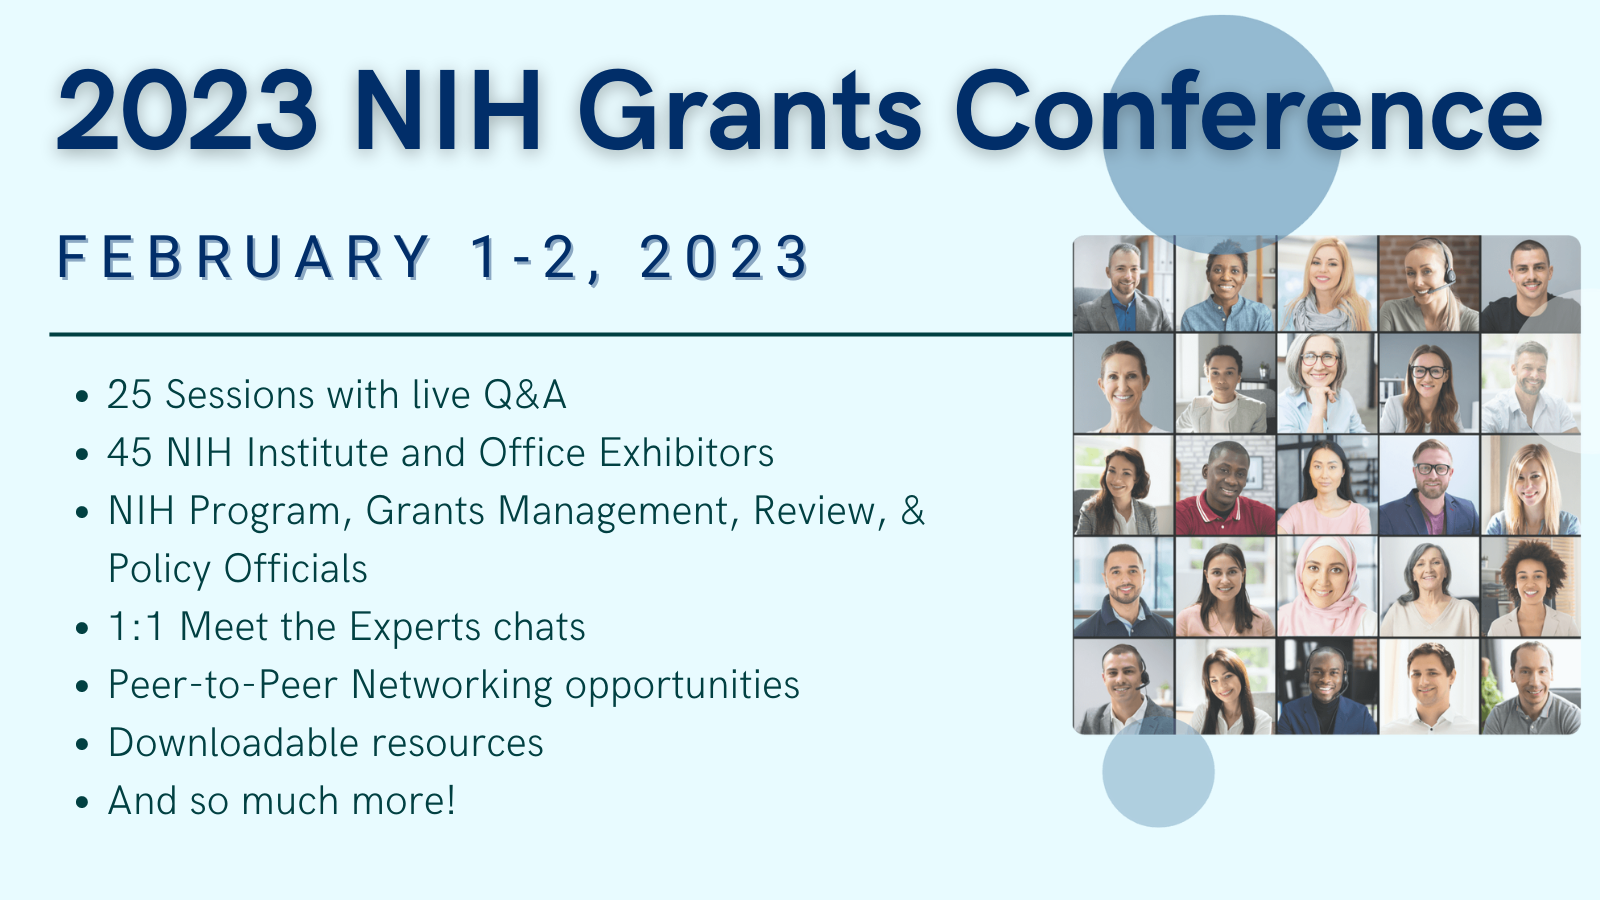 Free Crash Course in NIH Funding 2023 NIH Grants Conference on Feb. 1